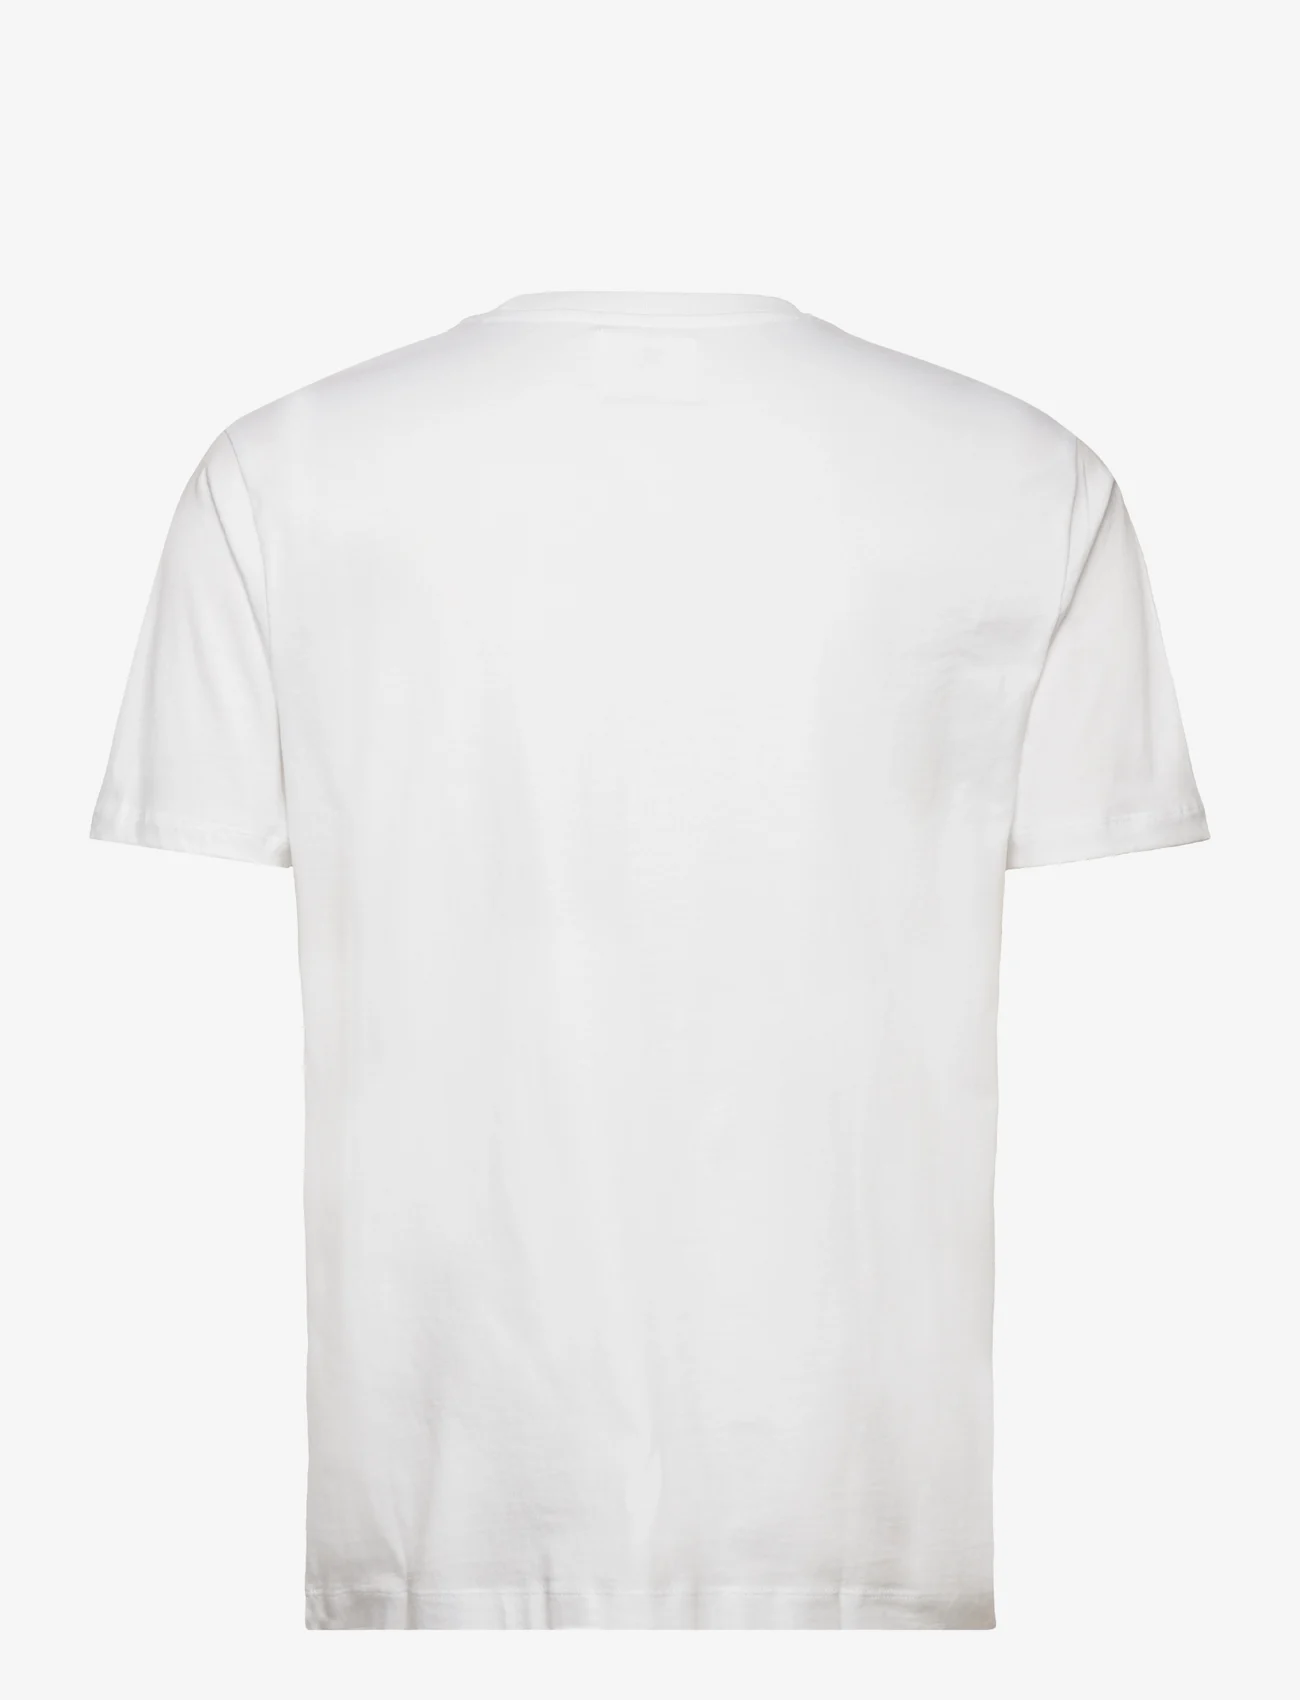 Double A by Wood Wood - Ace IVY T-shirt GOTS - kortærmede t-shirts - white - 1